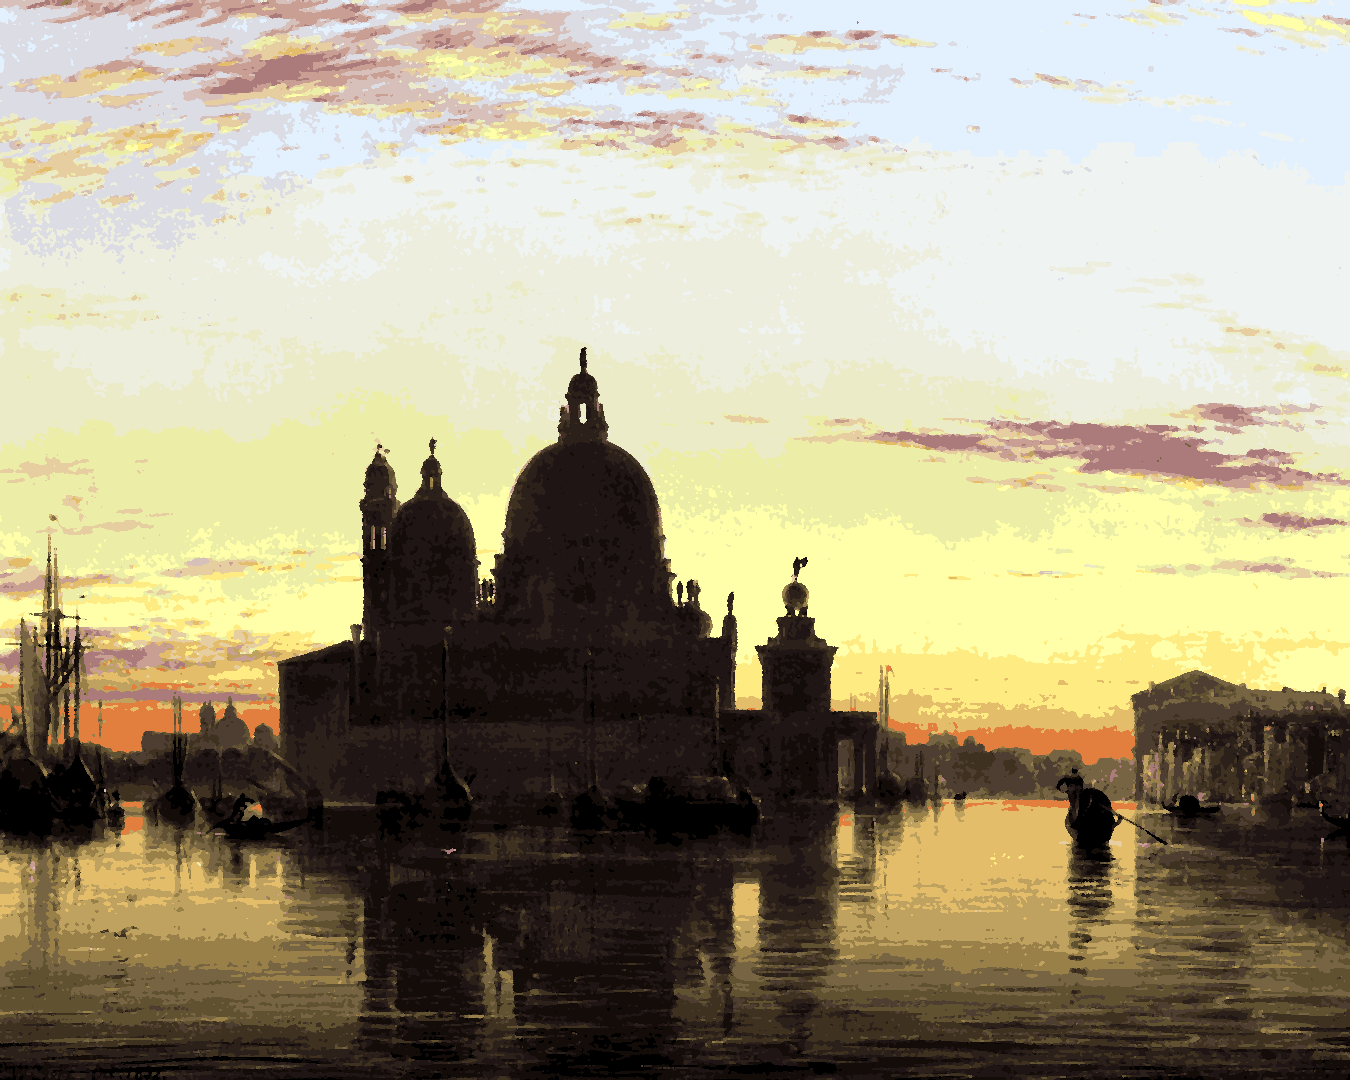 Venice, Italy Collection PD (24) - Santa Maria della Salute by Edward William Cooke - Van-Go Paint-By-Number Kit